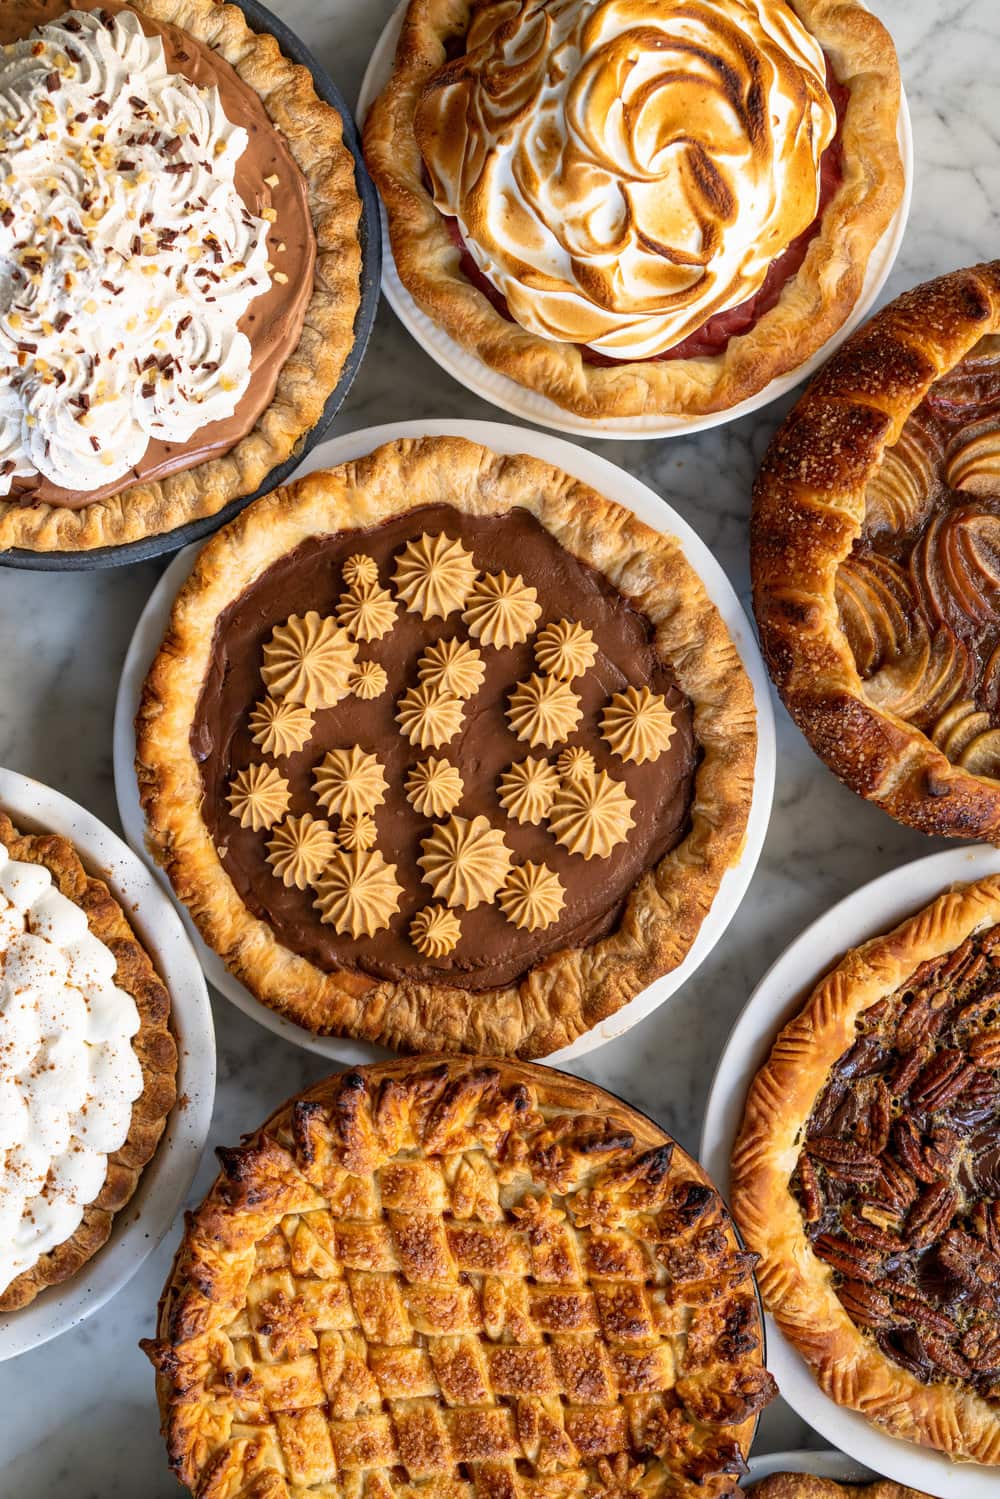 Different types of pies